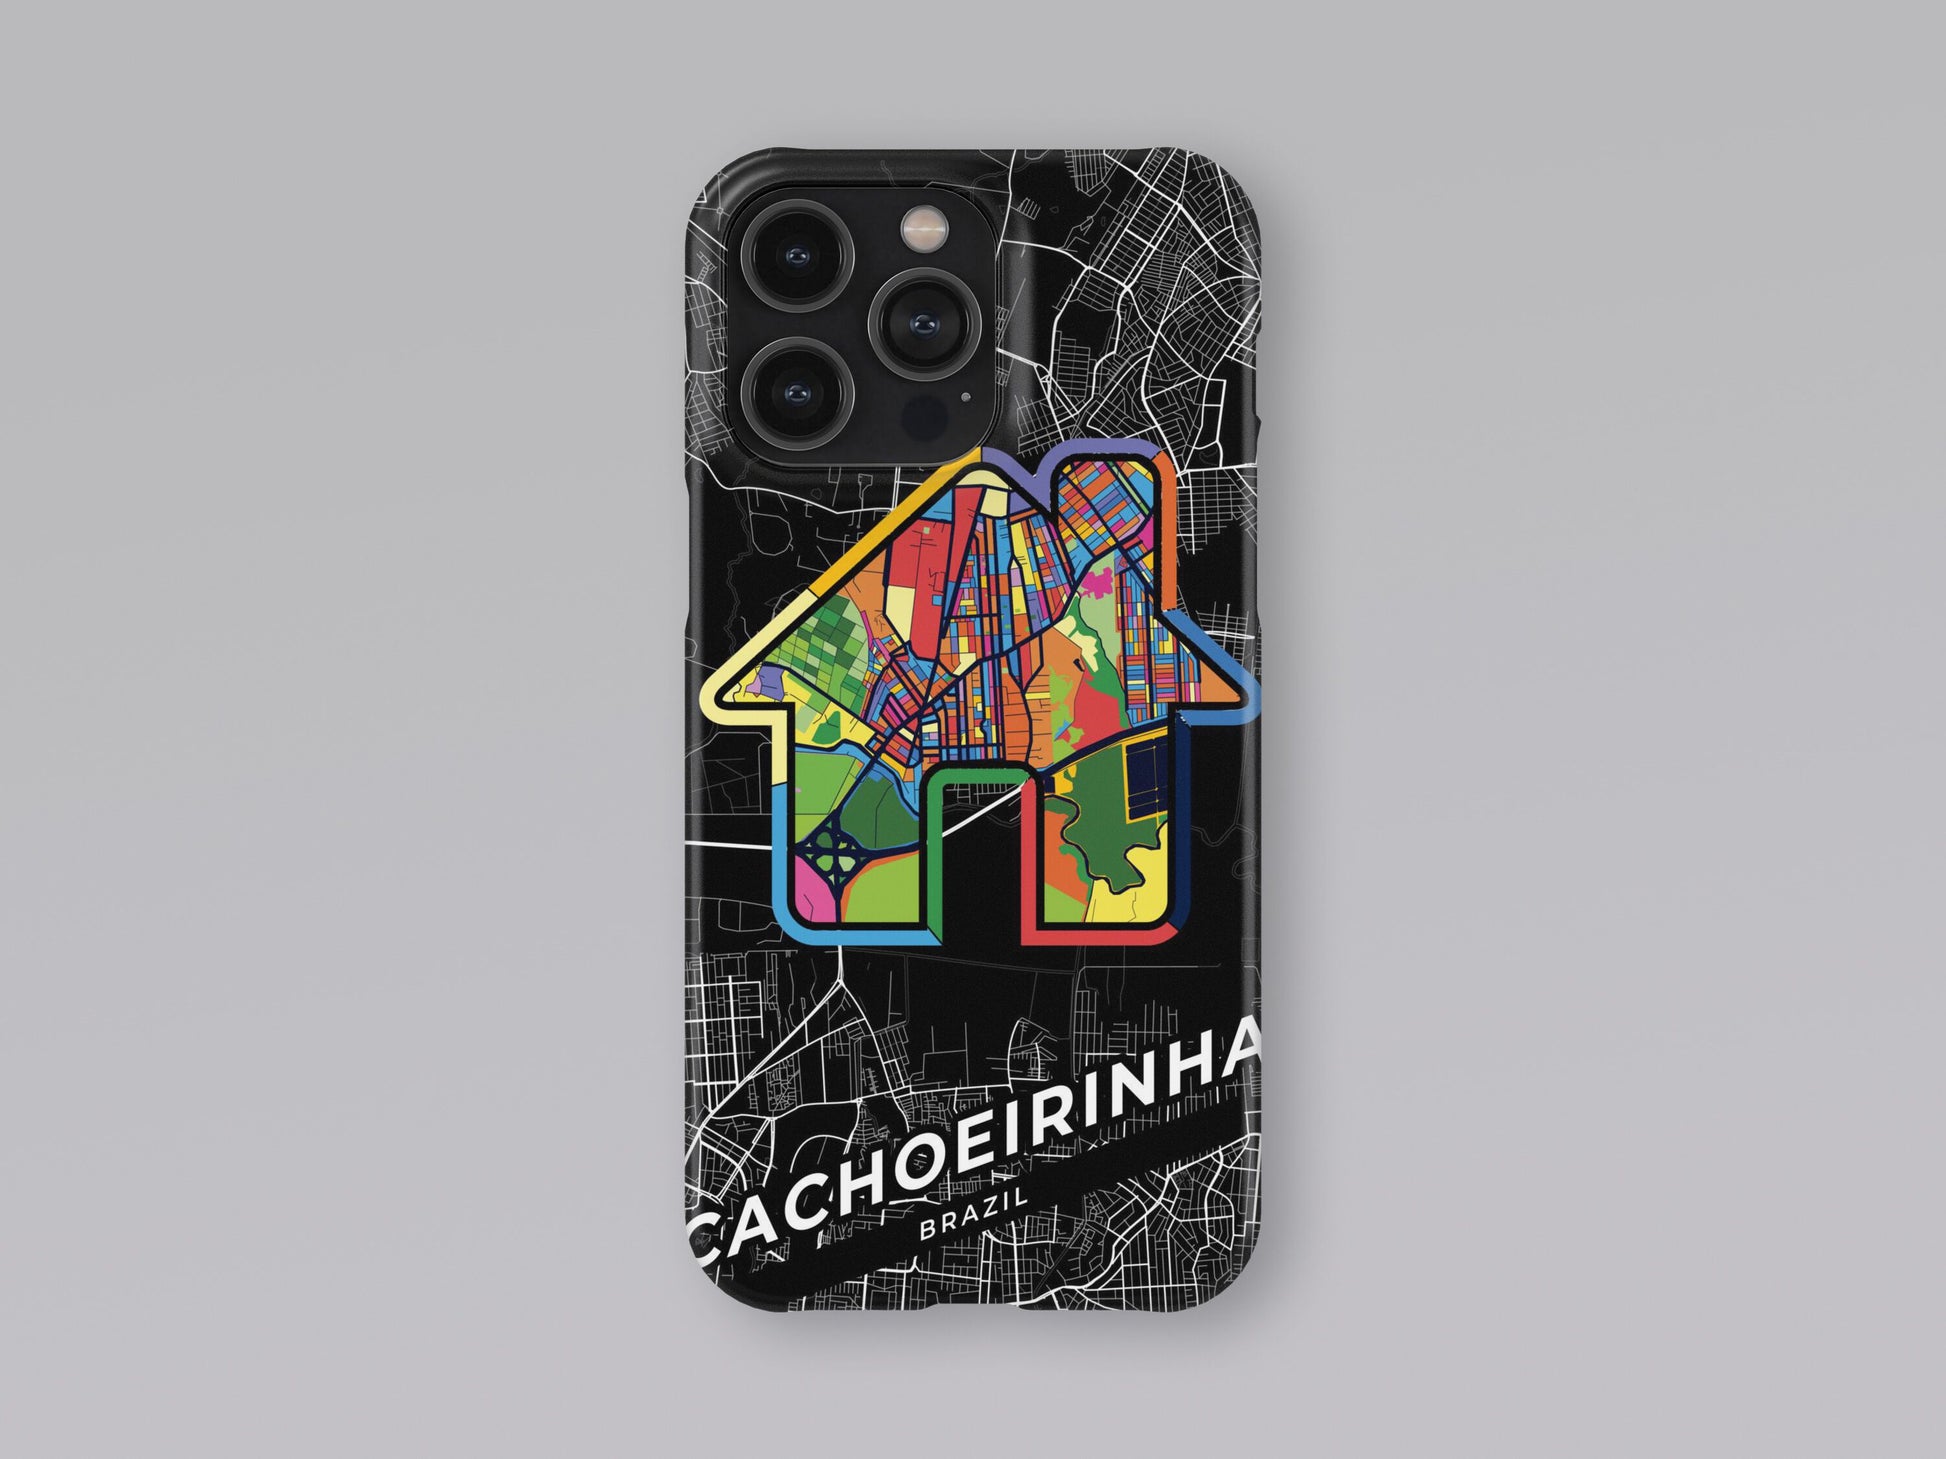 Cachoeirinha Brazil slim phone case with colorful icon. Birthday, wedding or housewarming gift. Couple match cases. 3